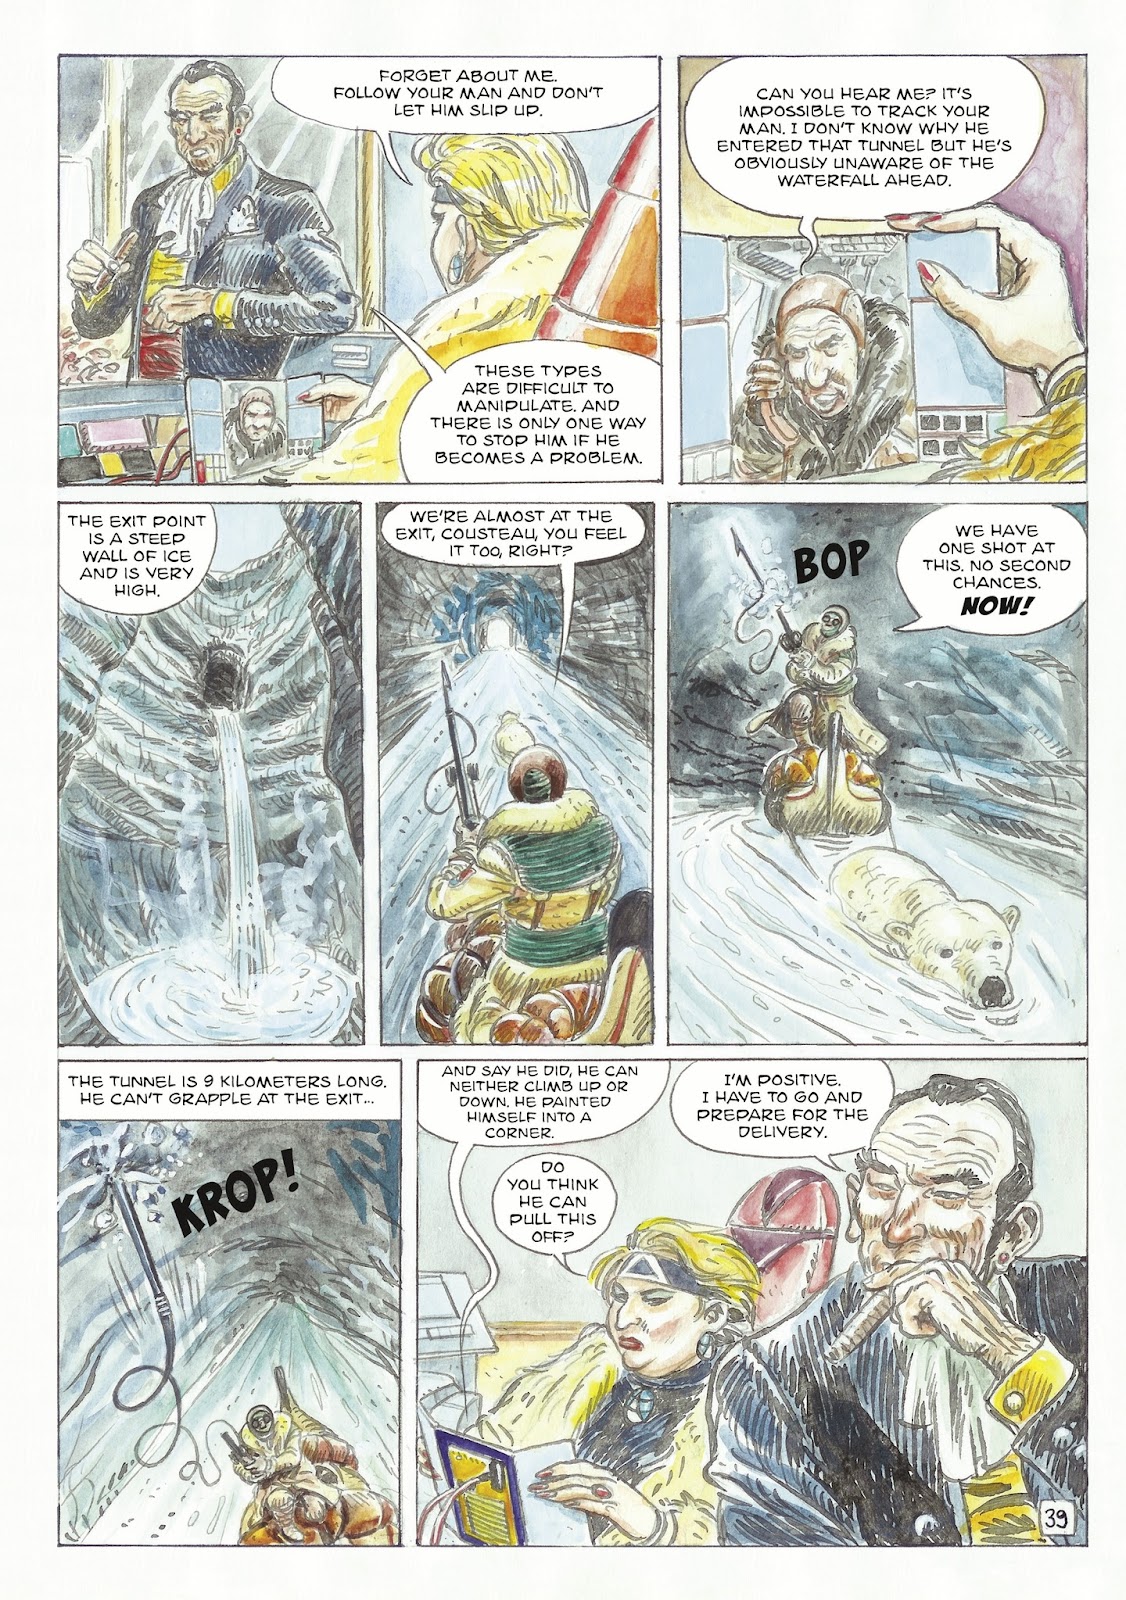 The Man With the Bear issue 1 - Page 41